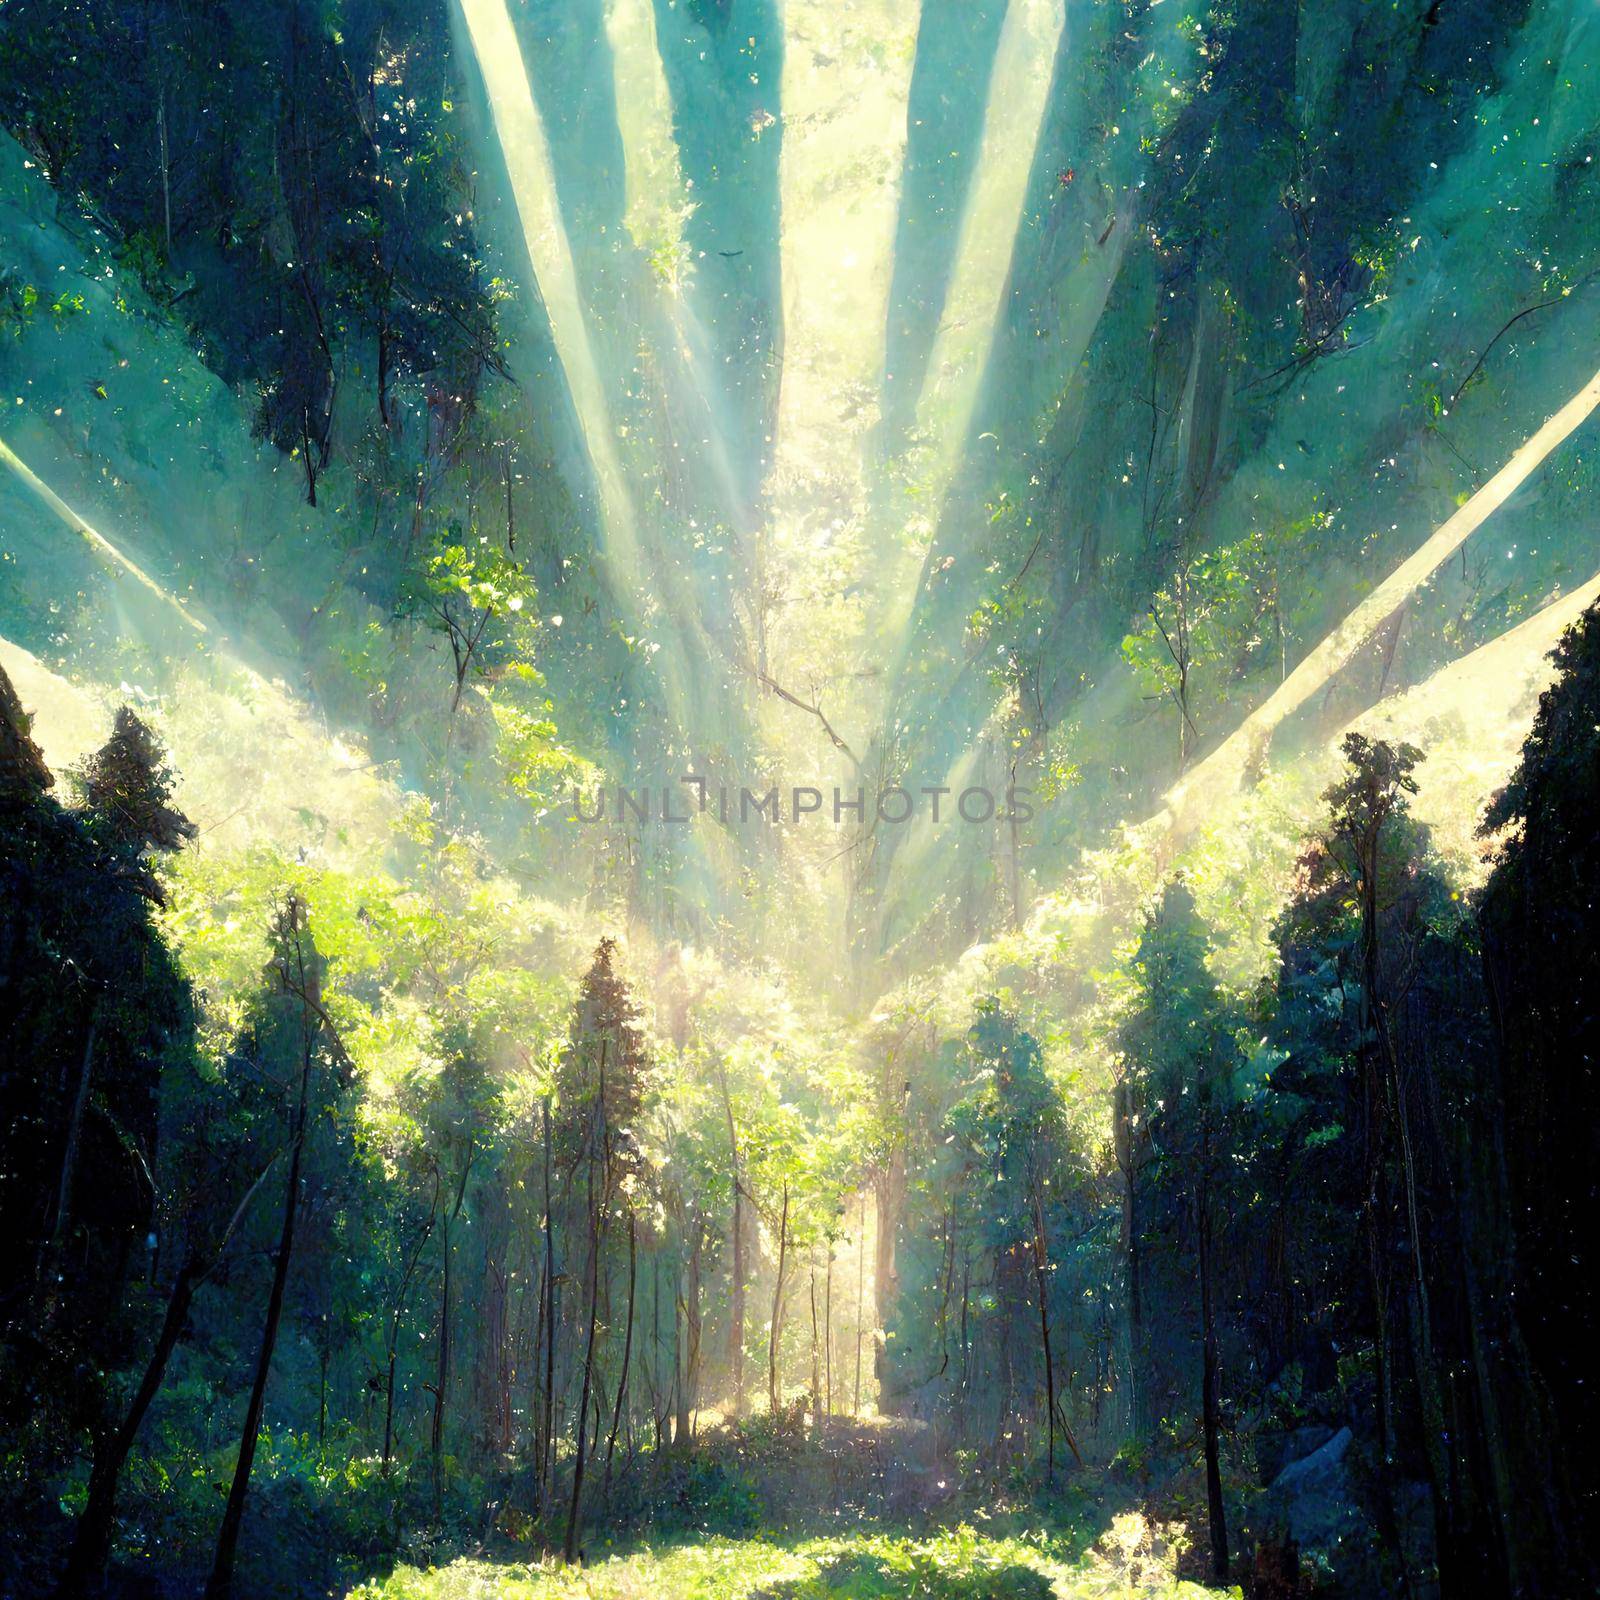 Light and forest - Day , Anime style, light rays. High quality illustration